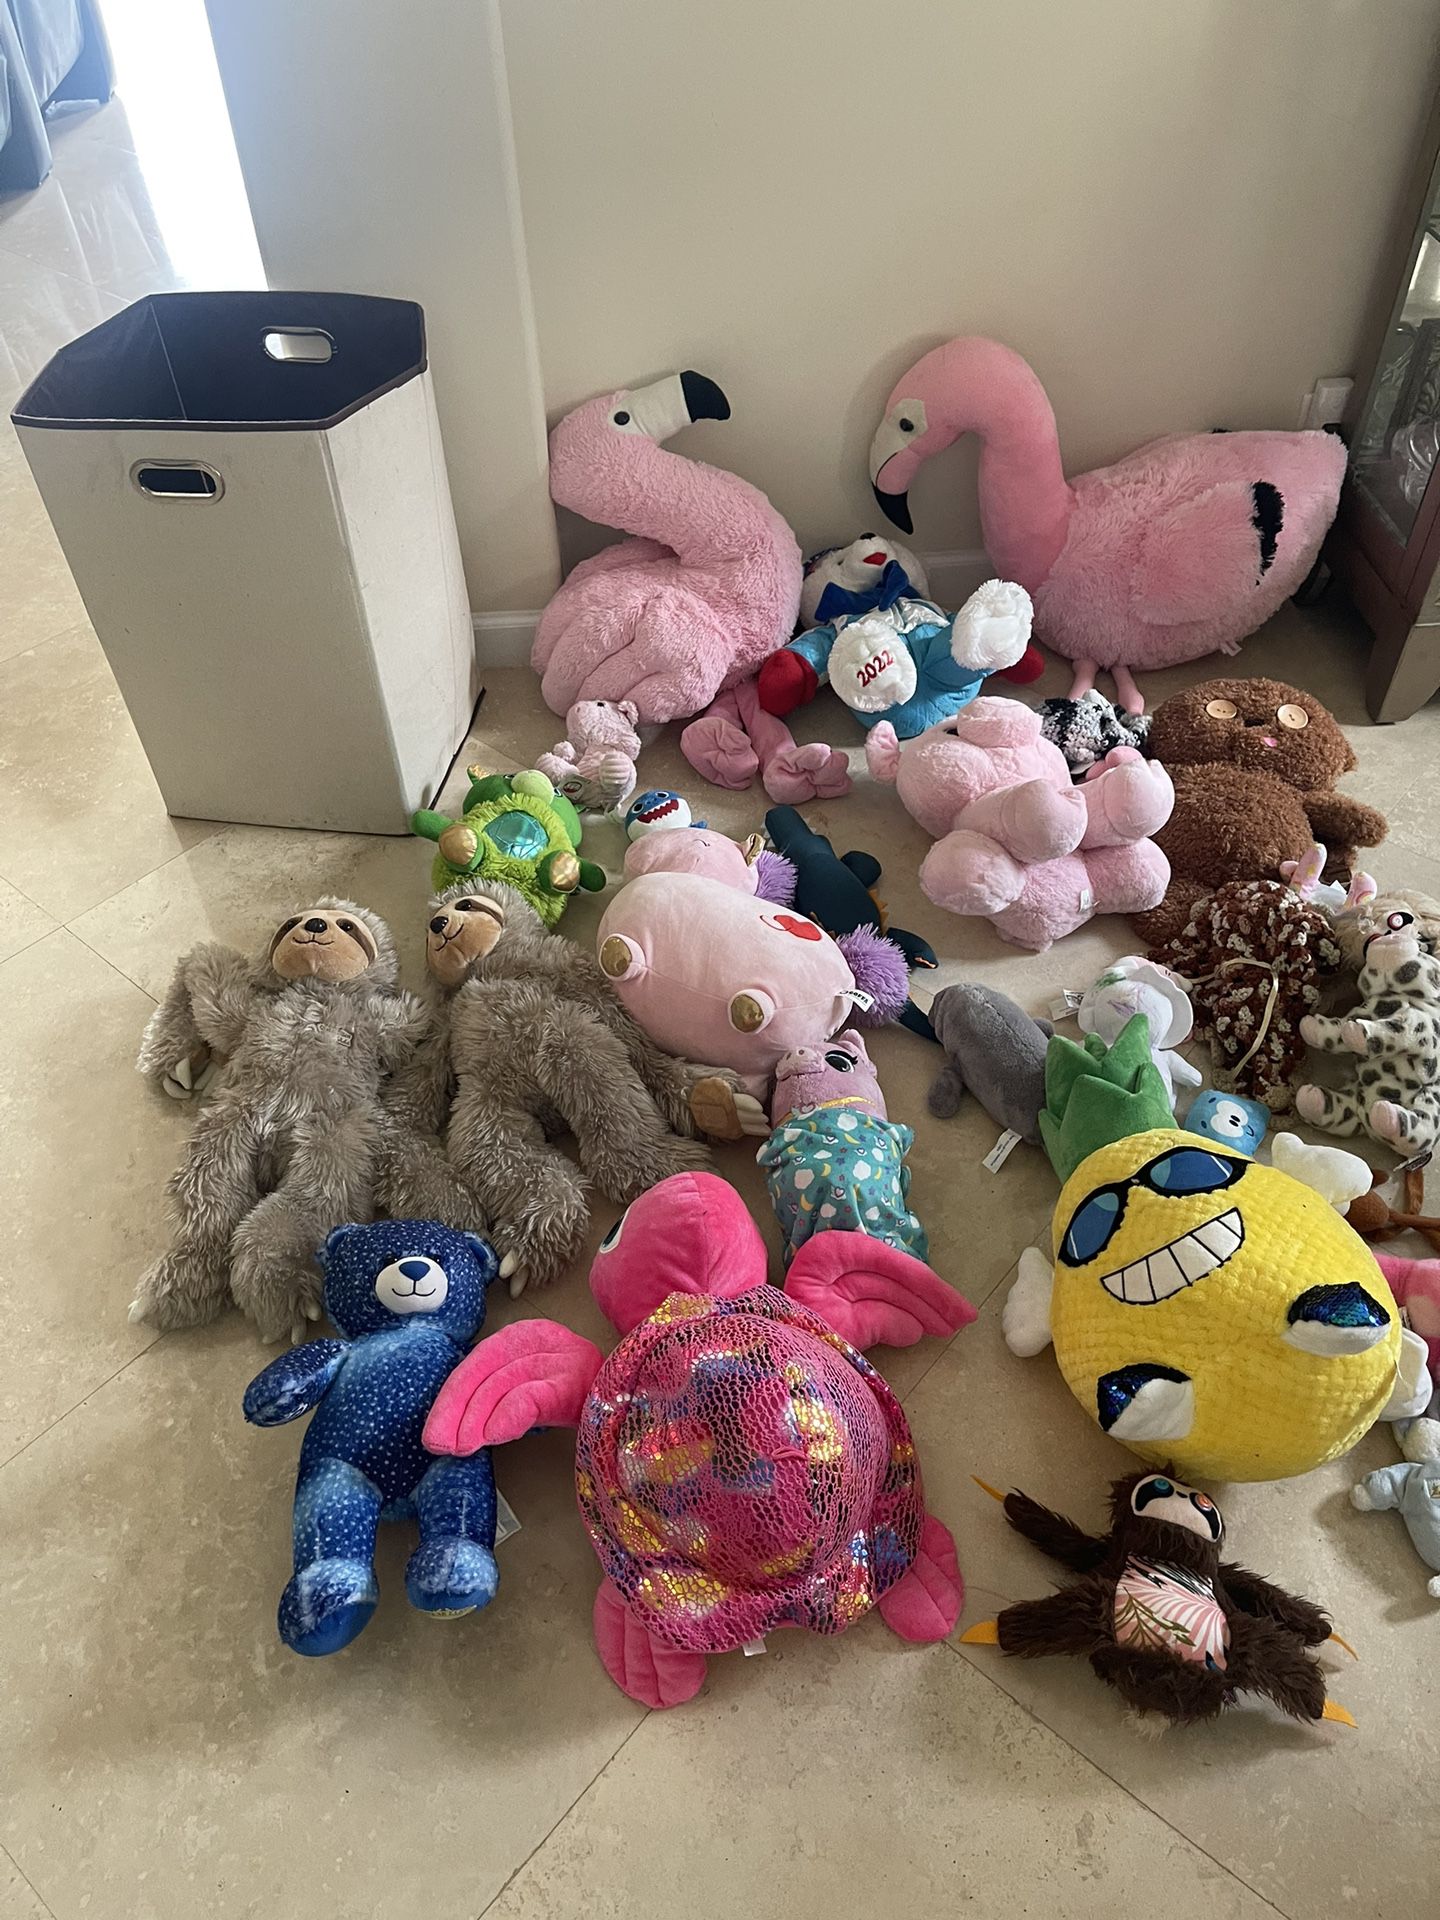  Stuffed Animals - LIKE NEW - $15 for ALL 